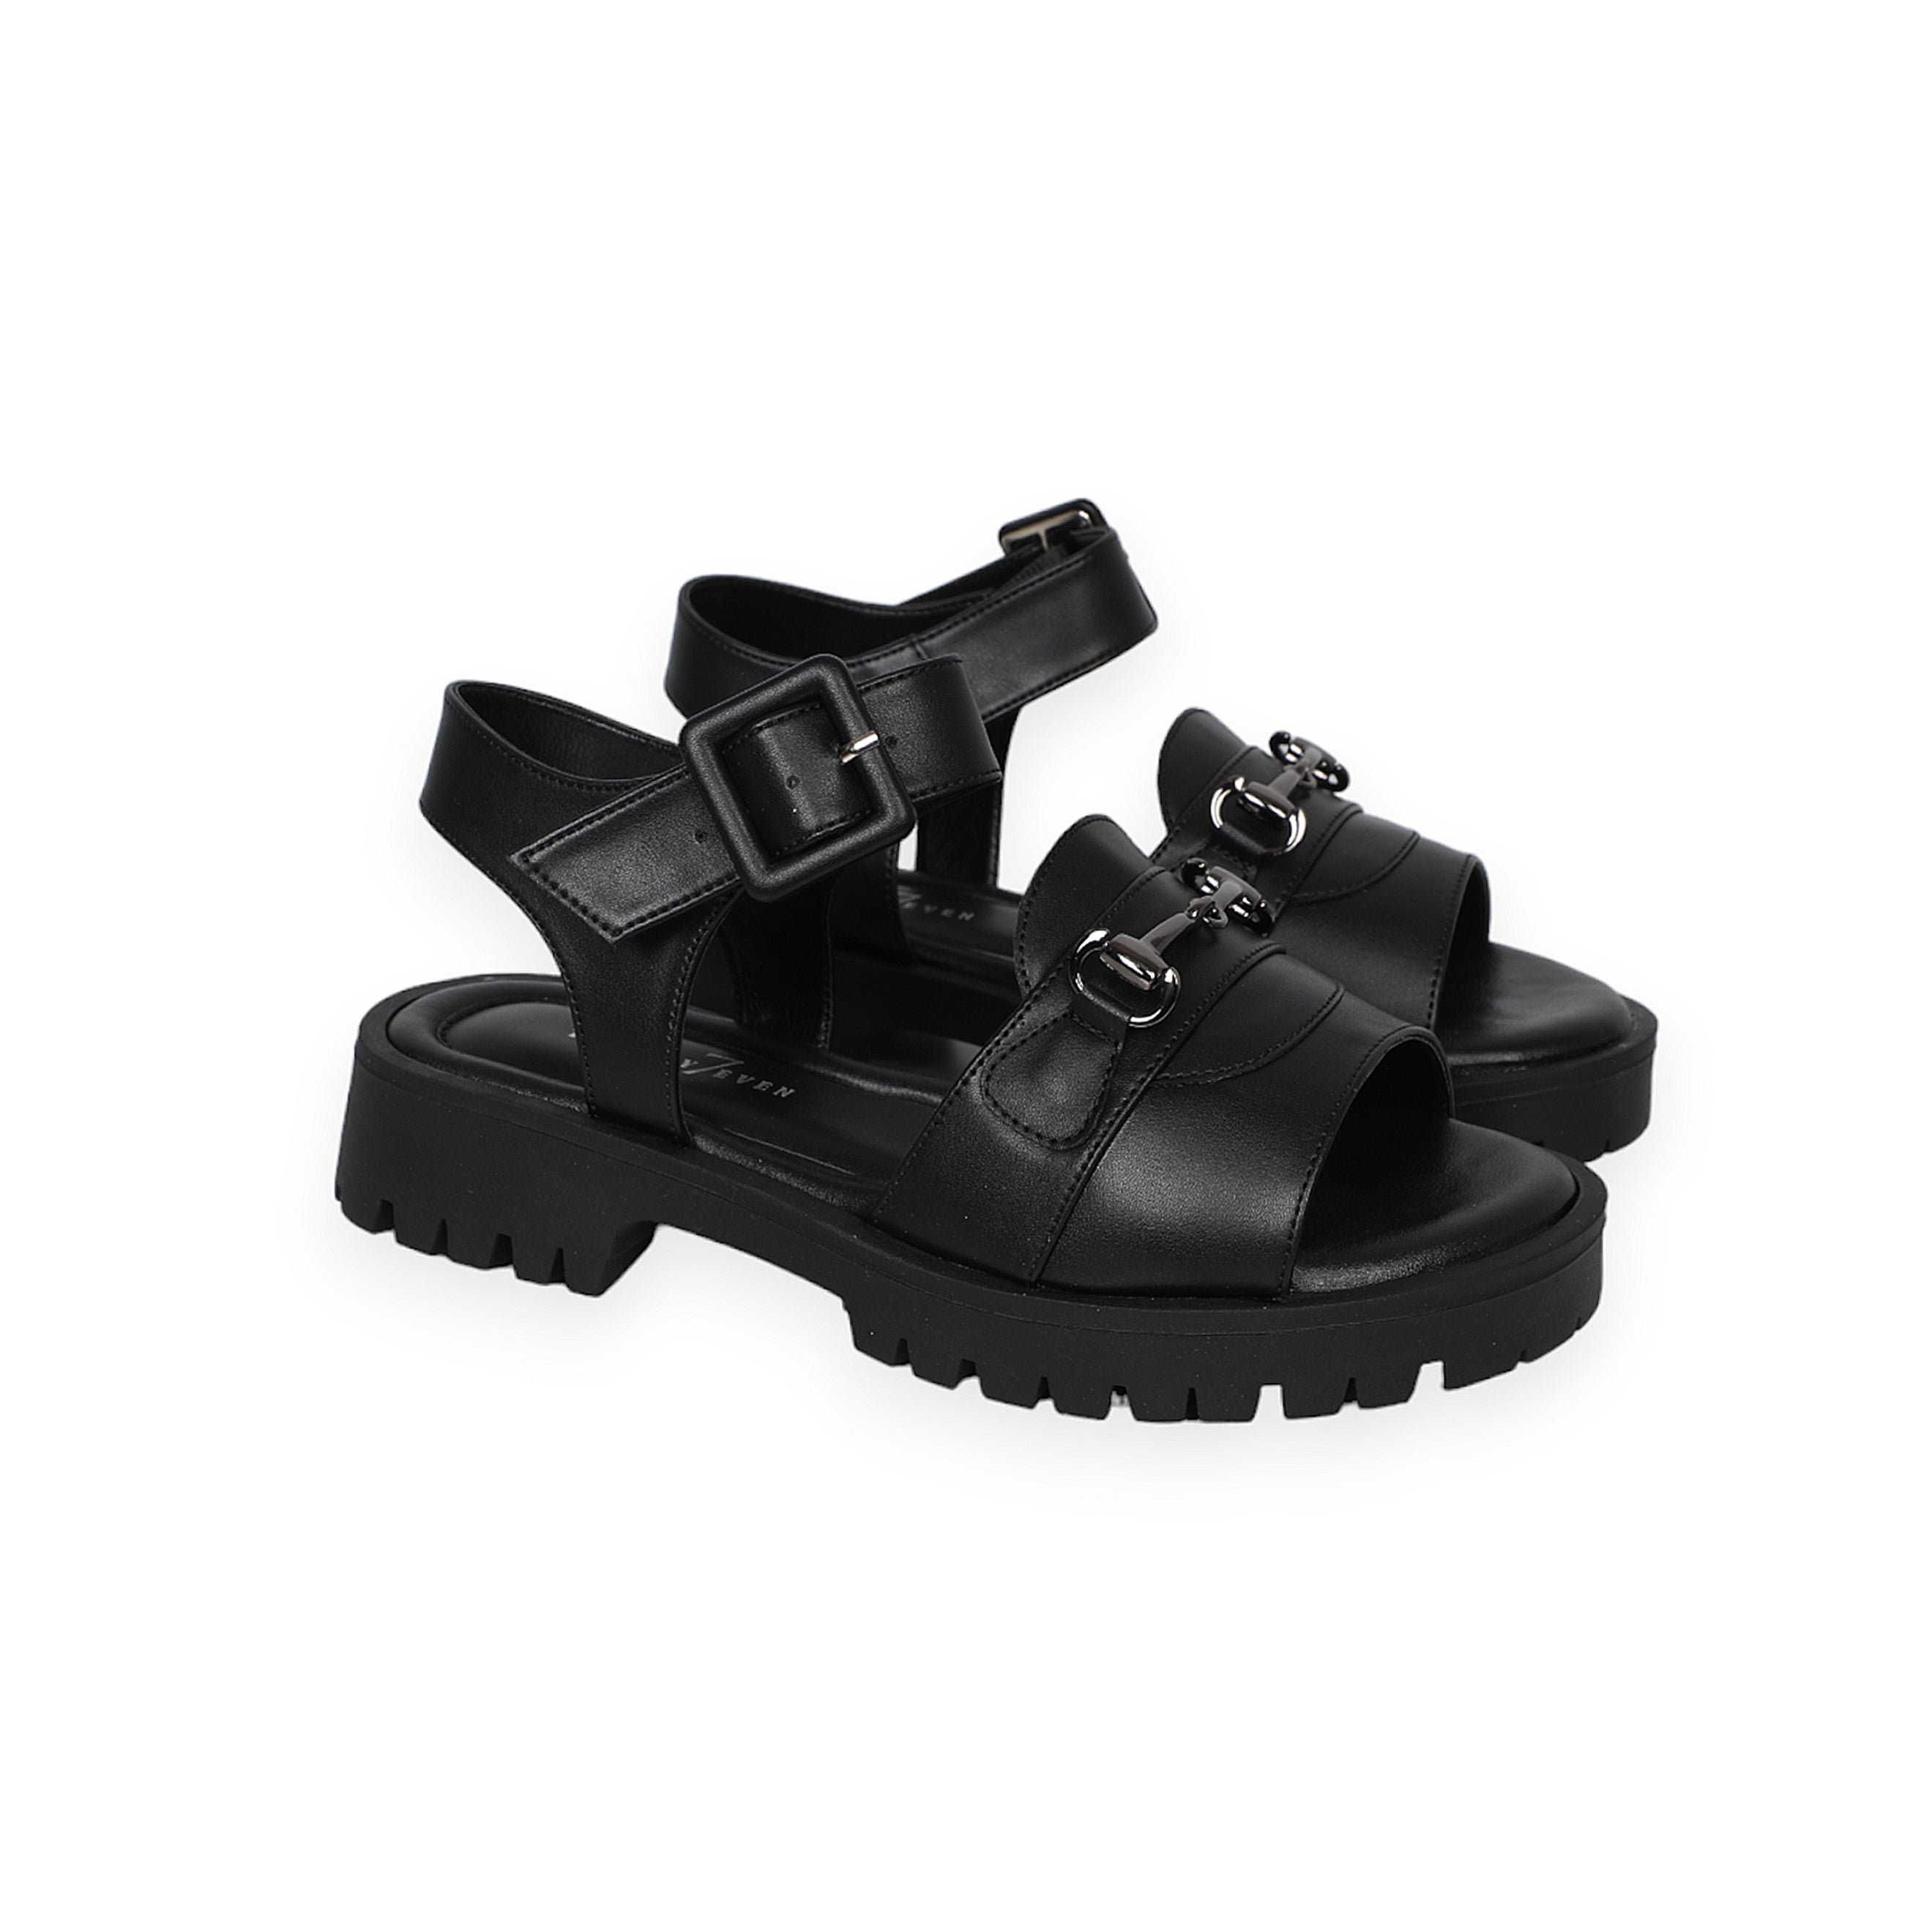 Black Women Sandals With Sole Ankle Strap